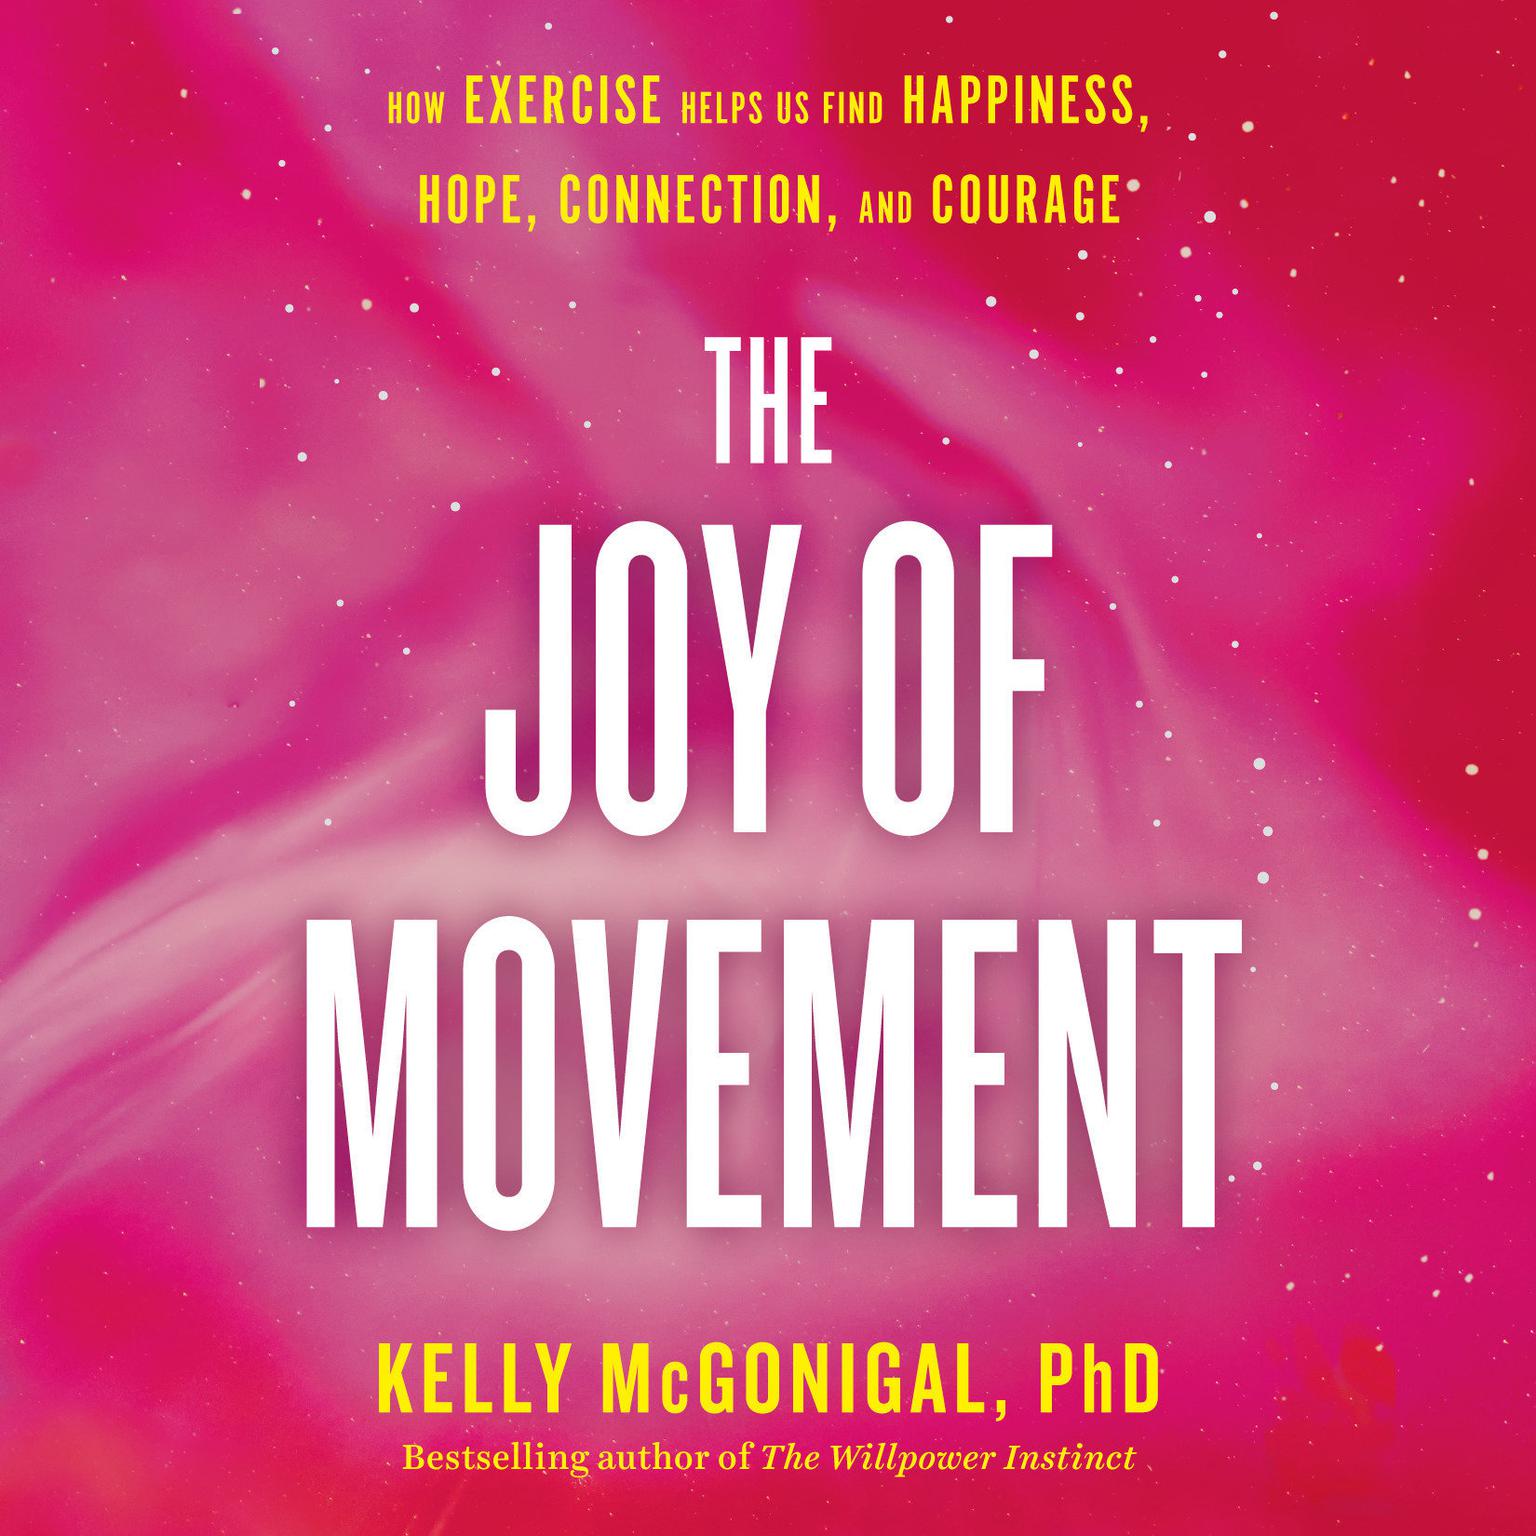 The Joy of Movement: How exercise helps us find happiness, hope, connection, and courage Audiobook, by Kelly McGonigal